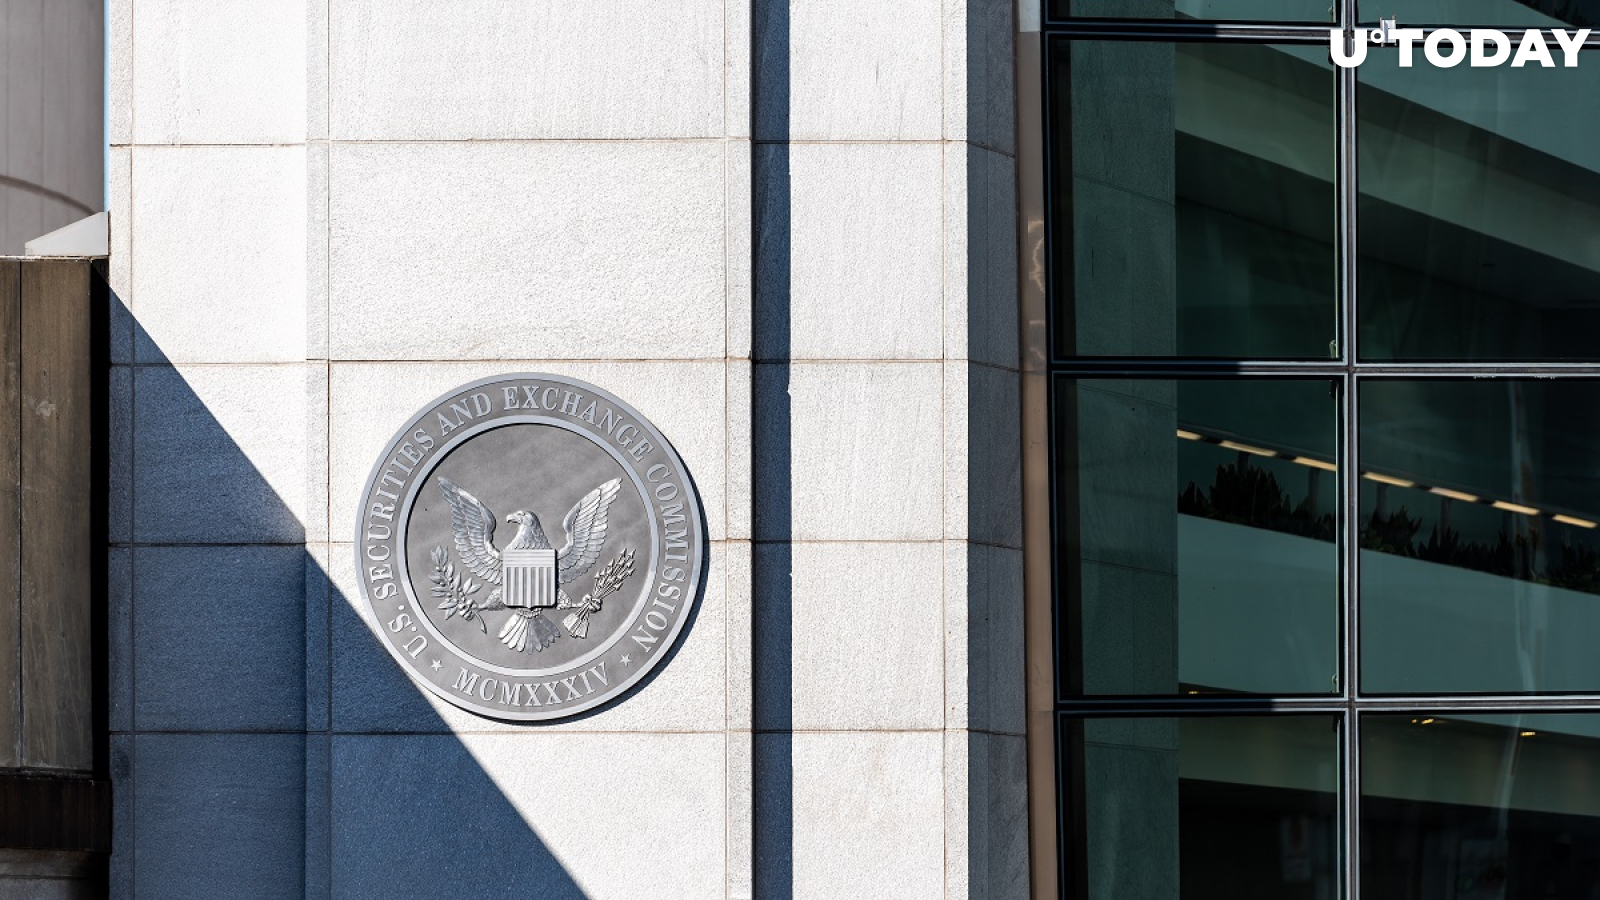 Ripple v. SEC: Court Orders Plaintiff to Submit Redactions